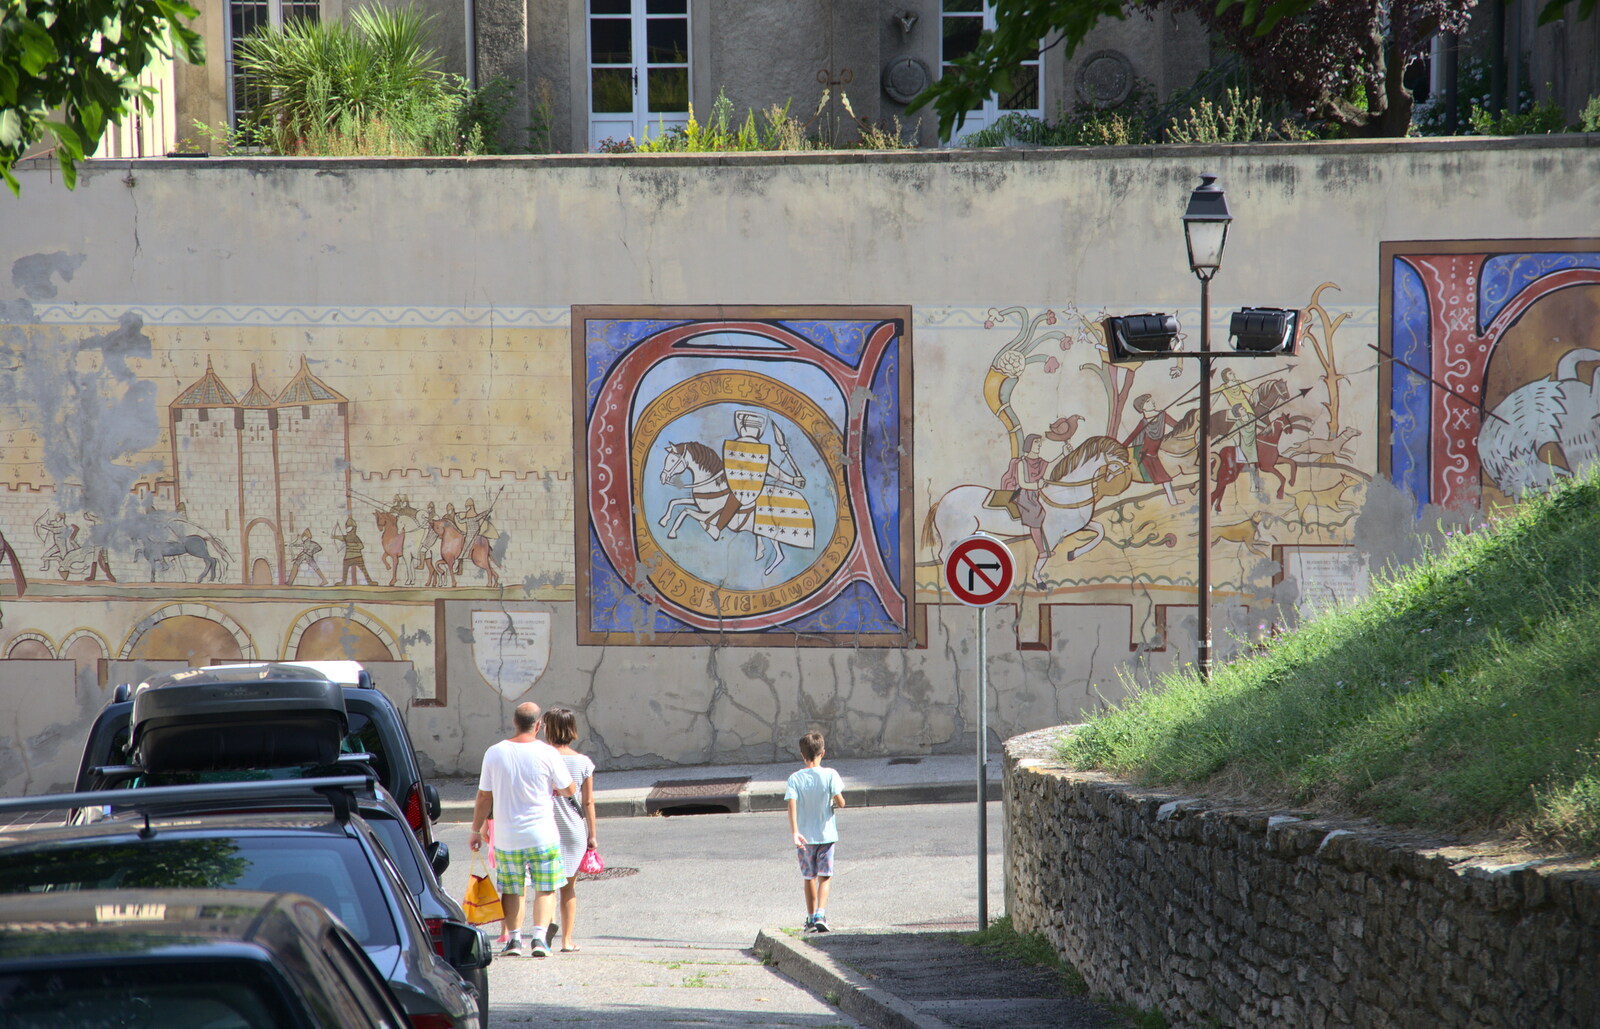 Nice wall murals on the Rue Trivalle from A Trip to Carcassonne, Aude, France - 8th August 2018